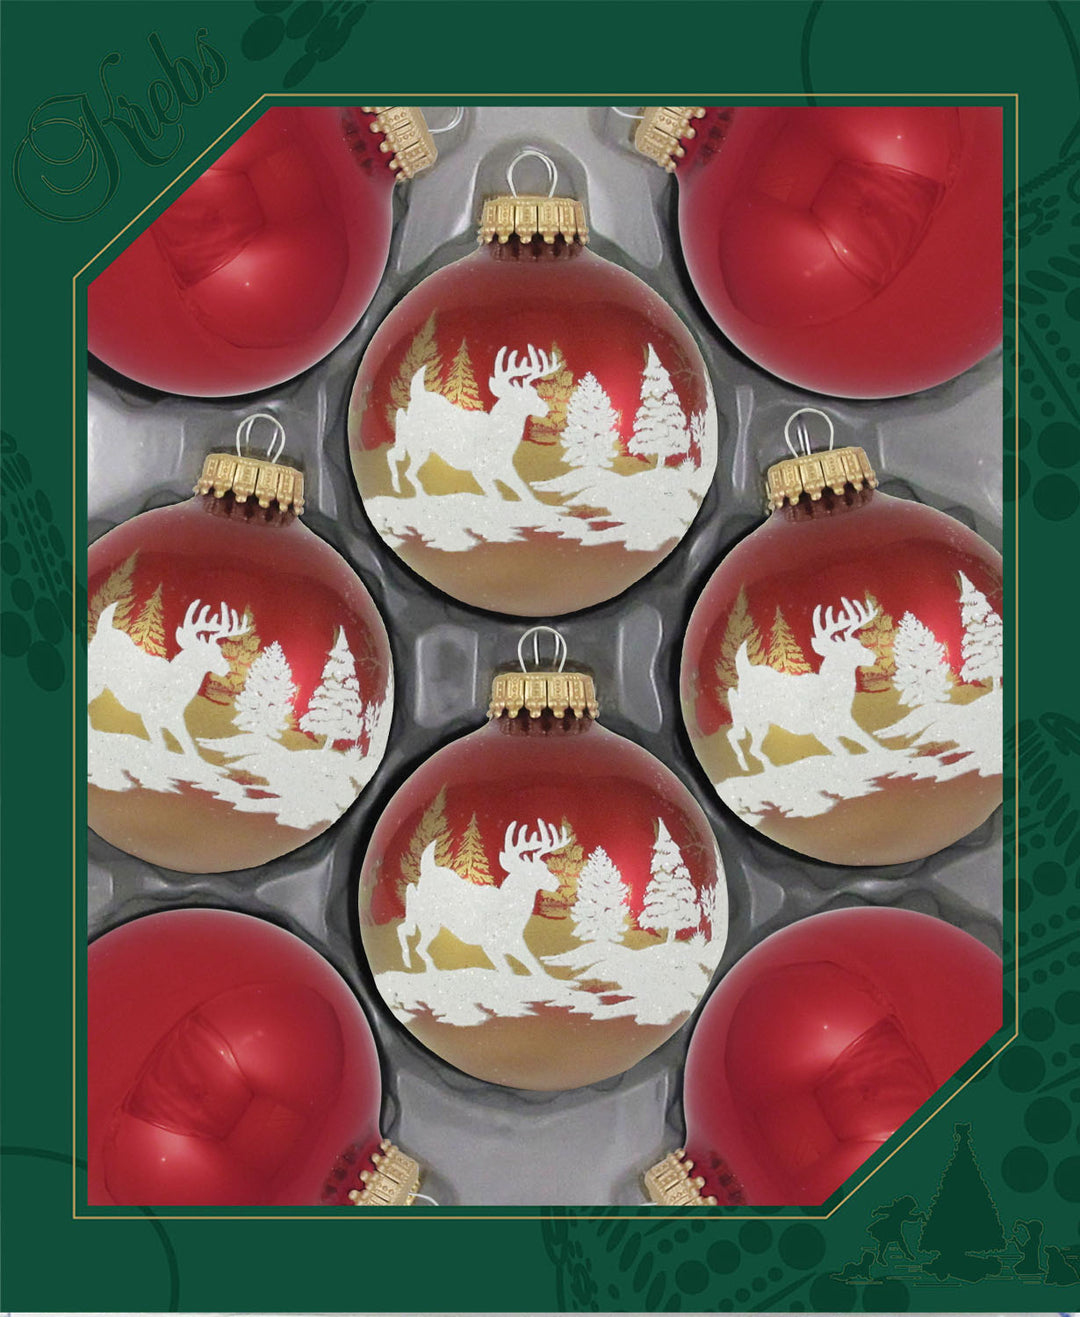 2 5/8" (67mm) Ball Ornaments, Ribbon Red Ball with Winter Deer Scene assortment, 8/Box, 12/Case, 96 Pieces